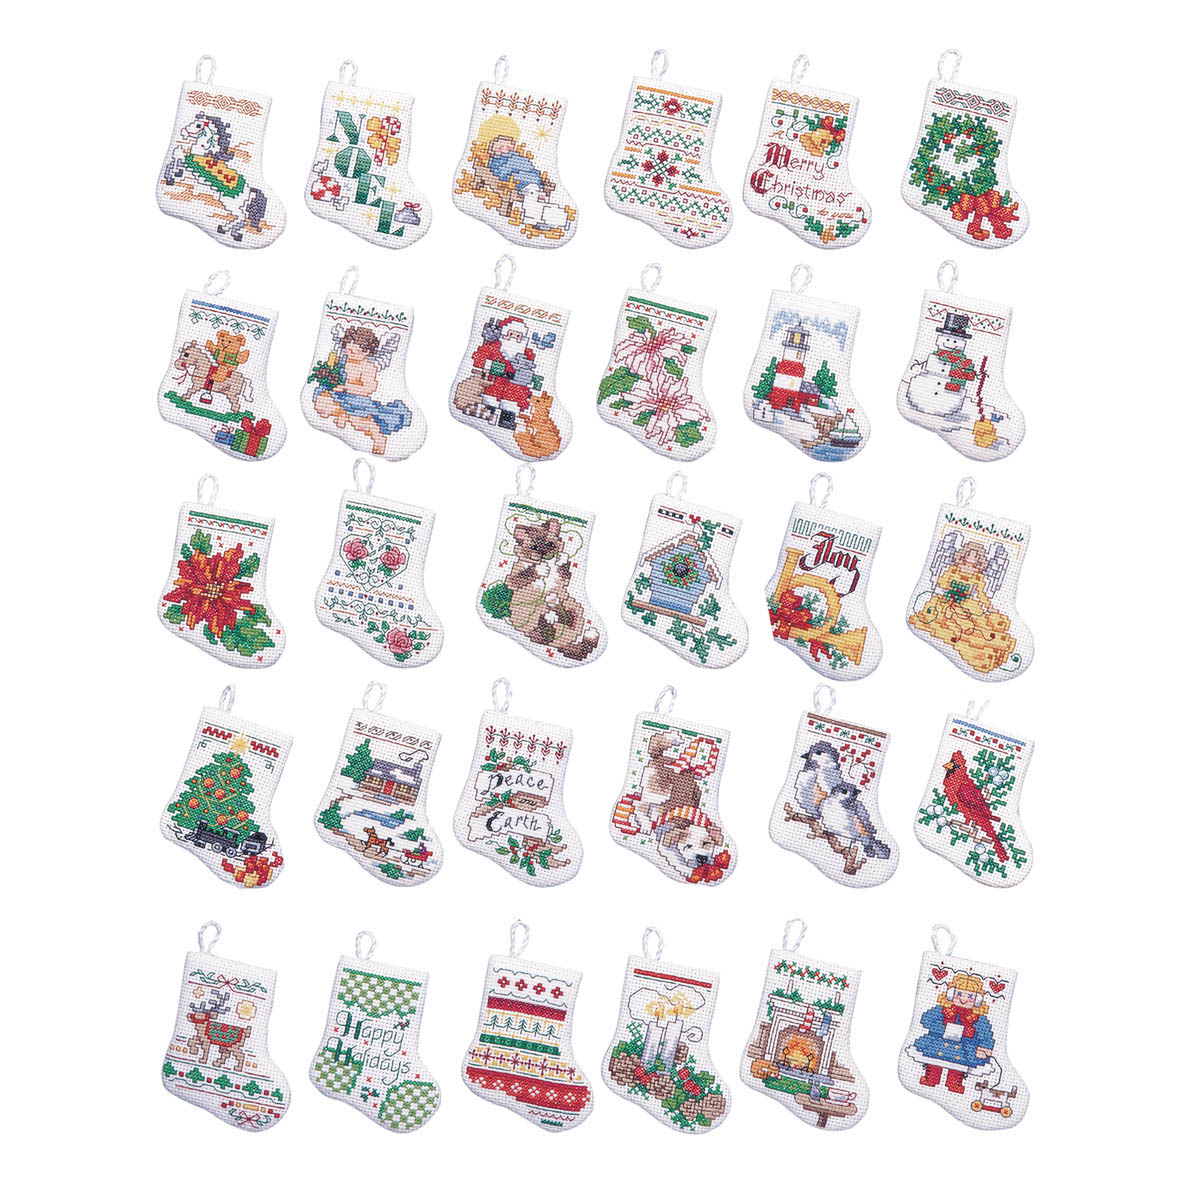 Bucilla Holiday • Cats On Staircase •Counted Cross Stitch Christmas Stocking  Kit